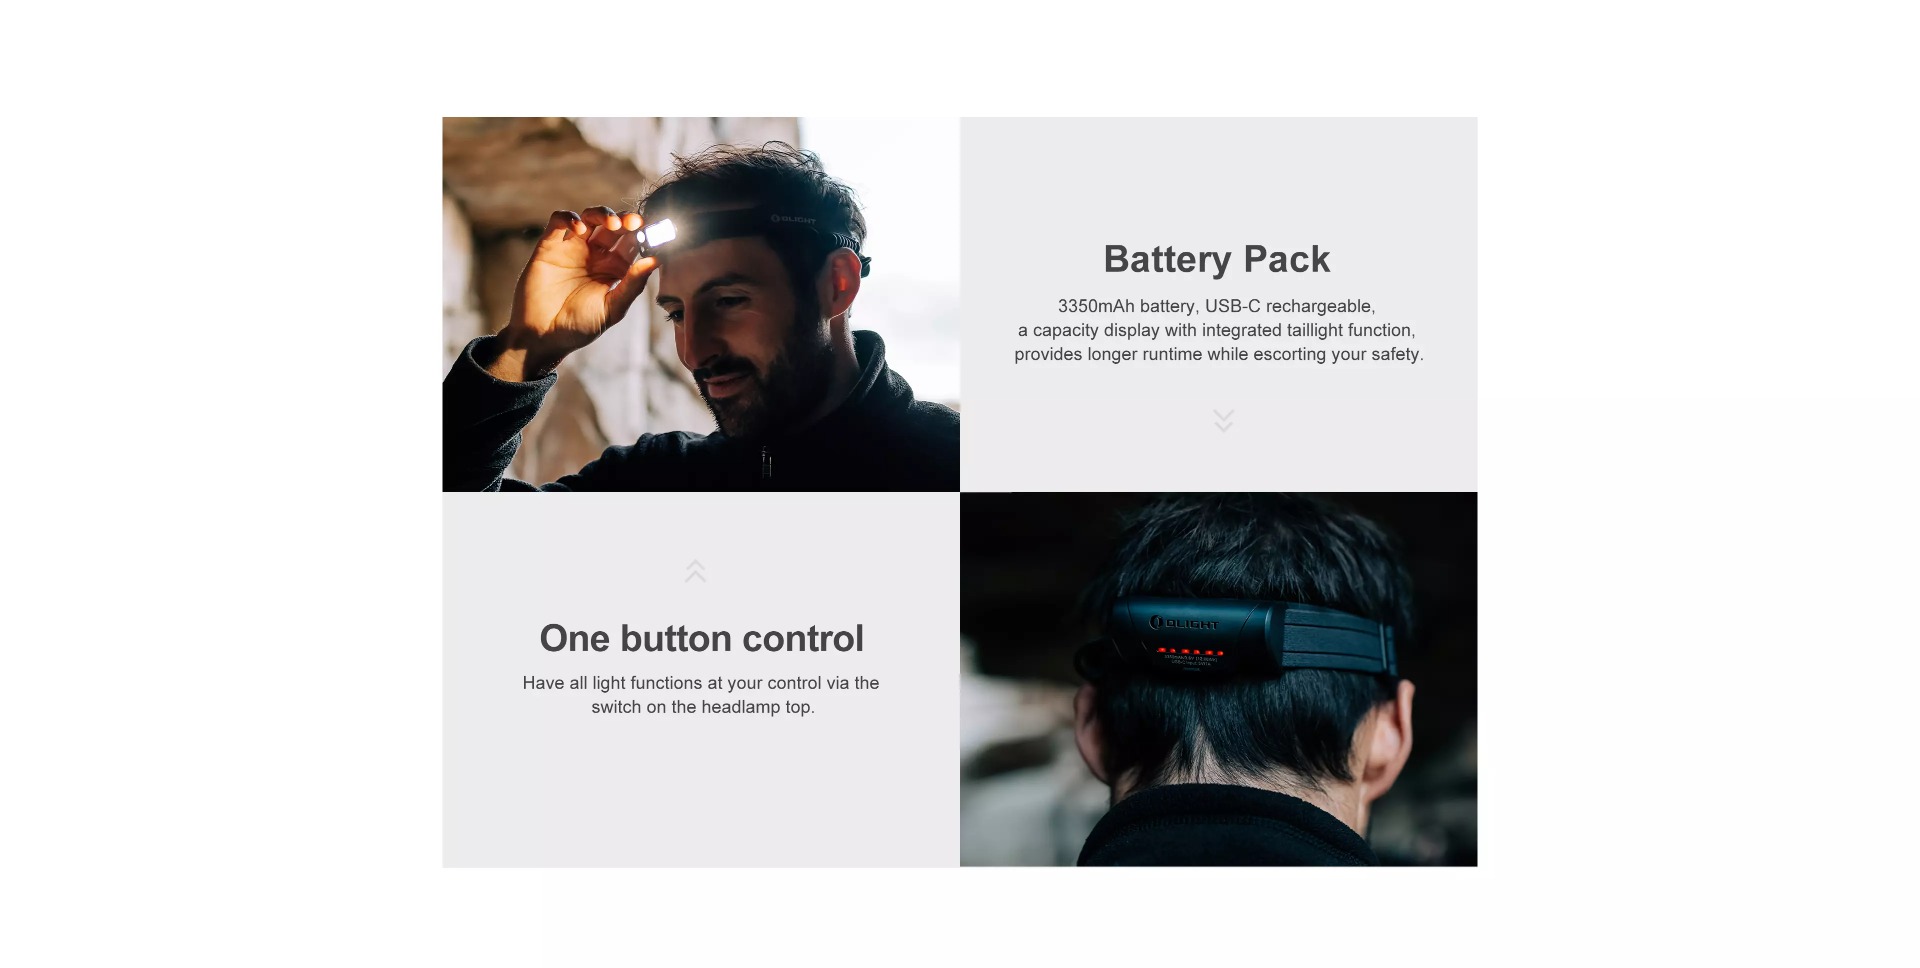 Battery pack – 1 button control 